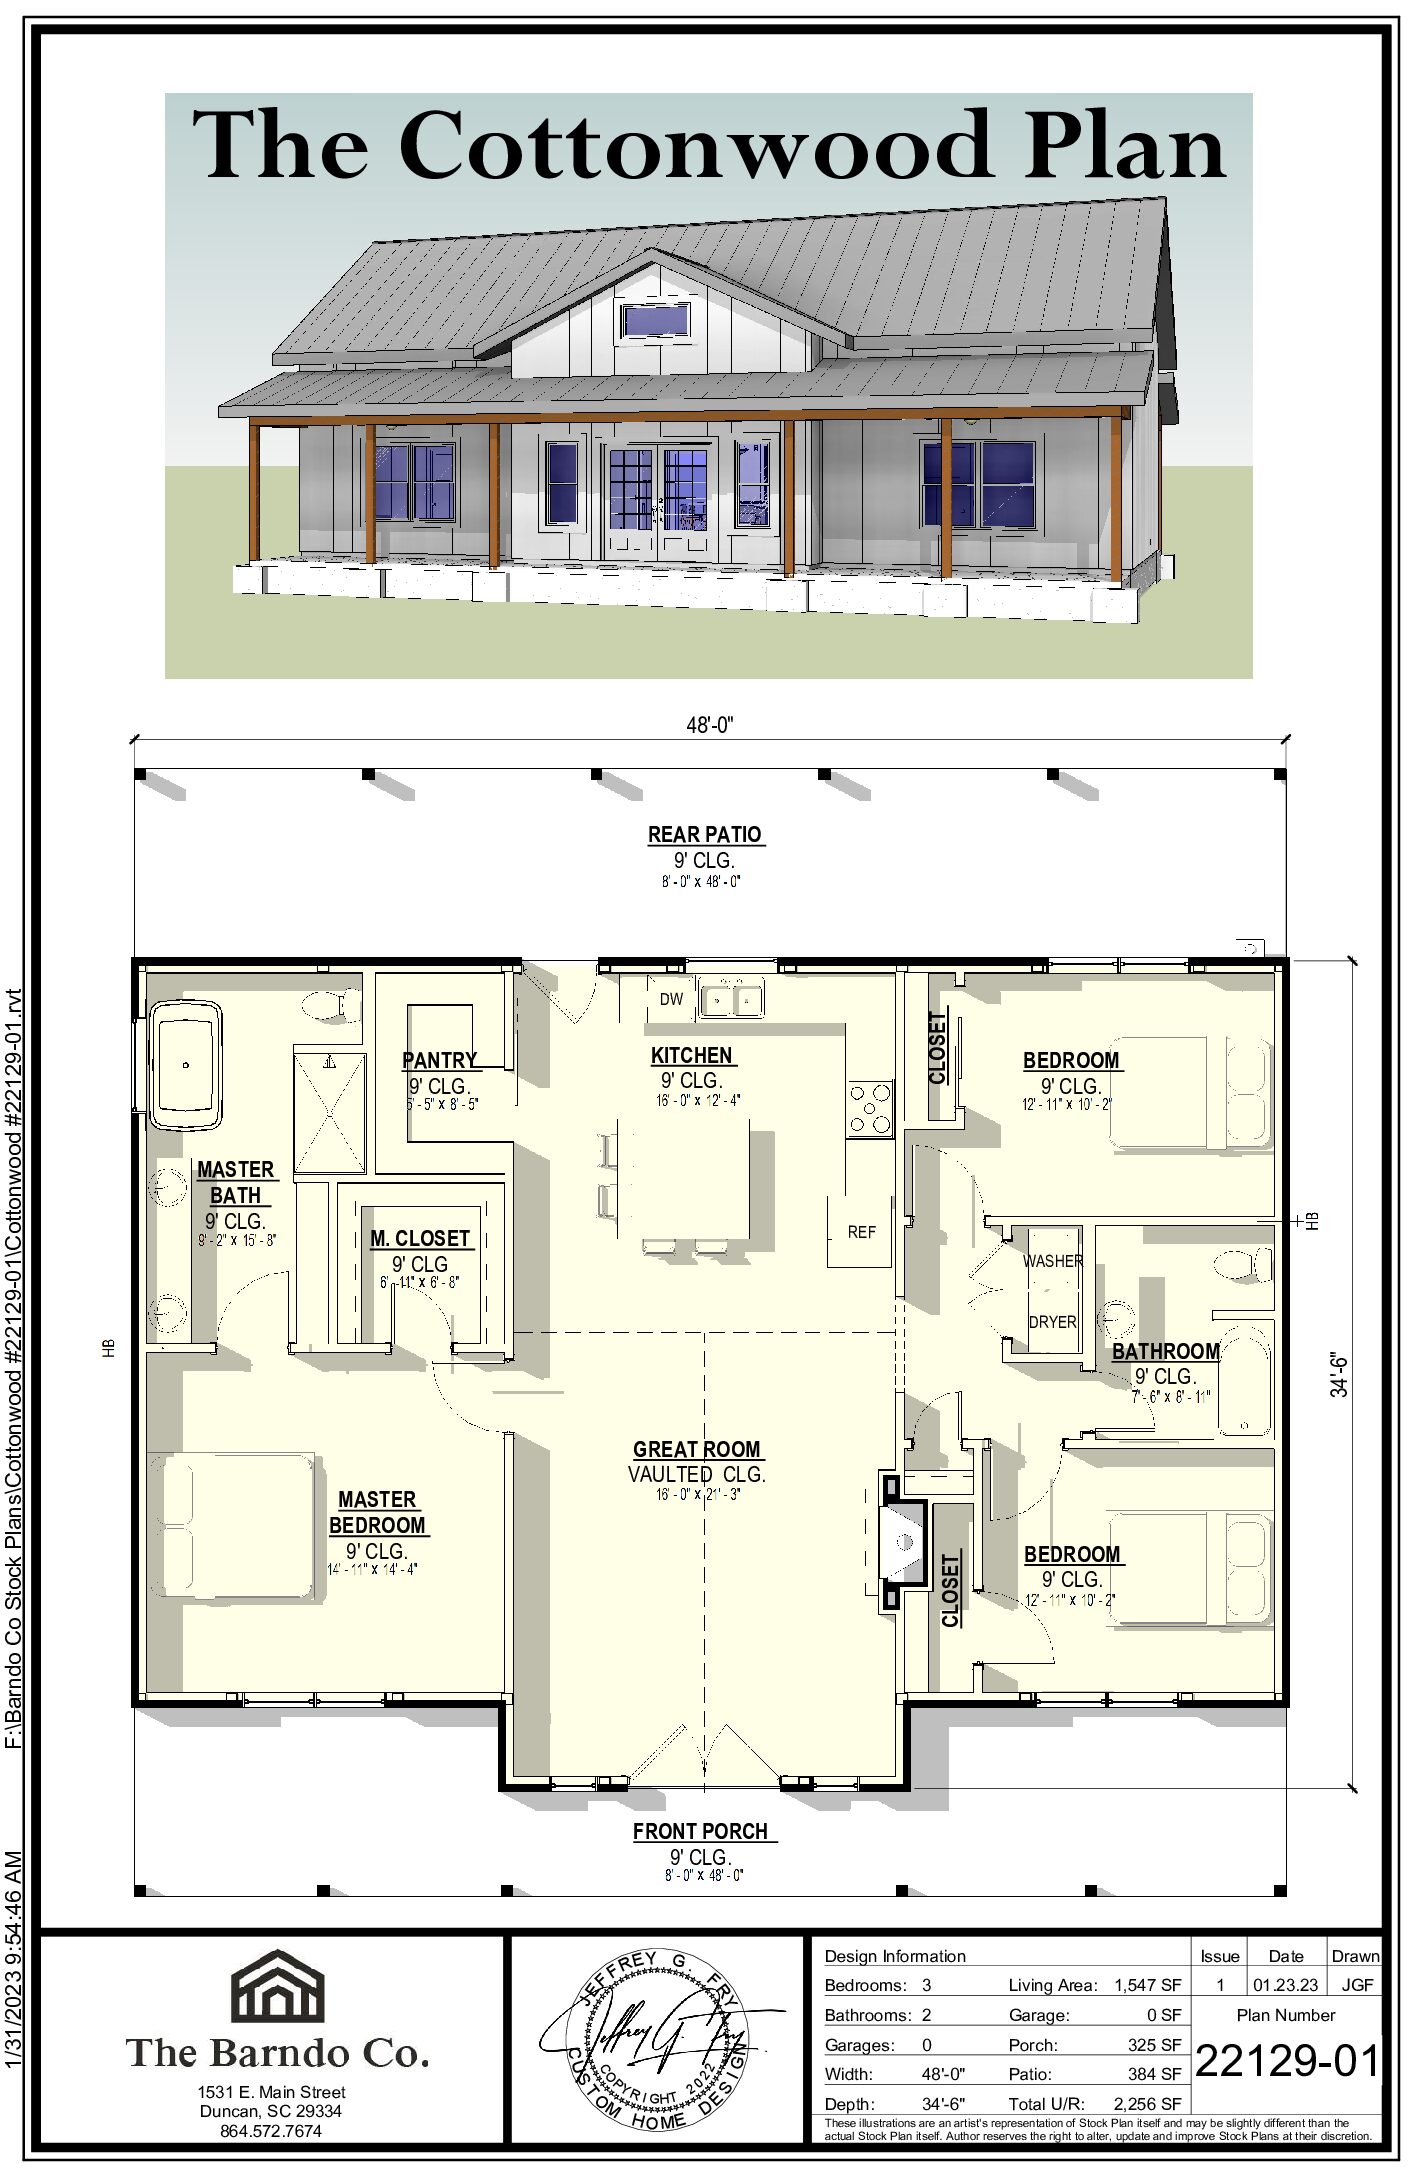 Home Plans The Cottonwood Plan